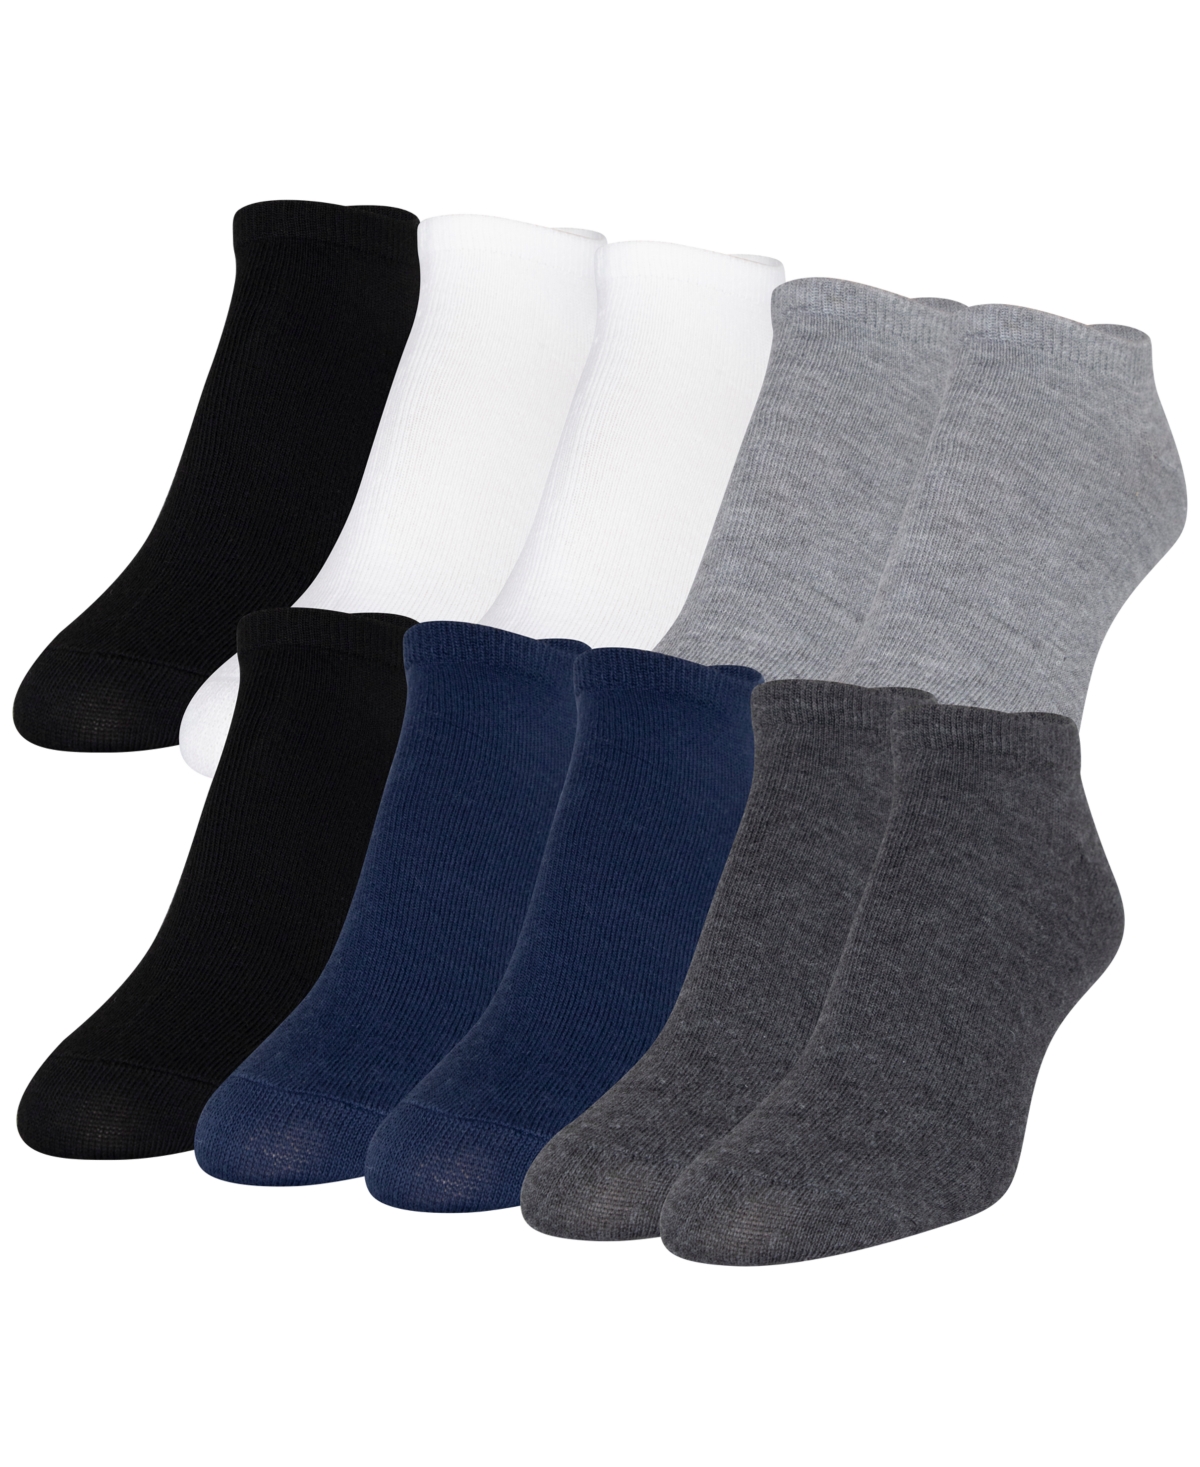 Gold Toe Women's 10-pack Casual Lightweight No-show Socks In Charcoal,grey,black,white,blue